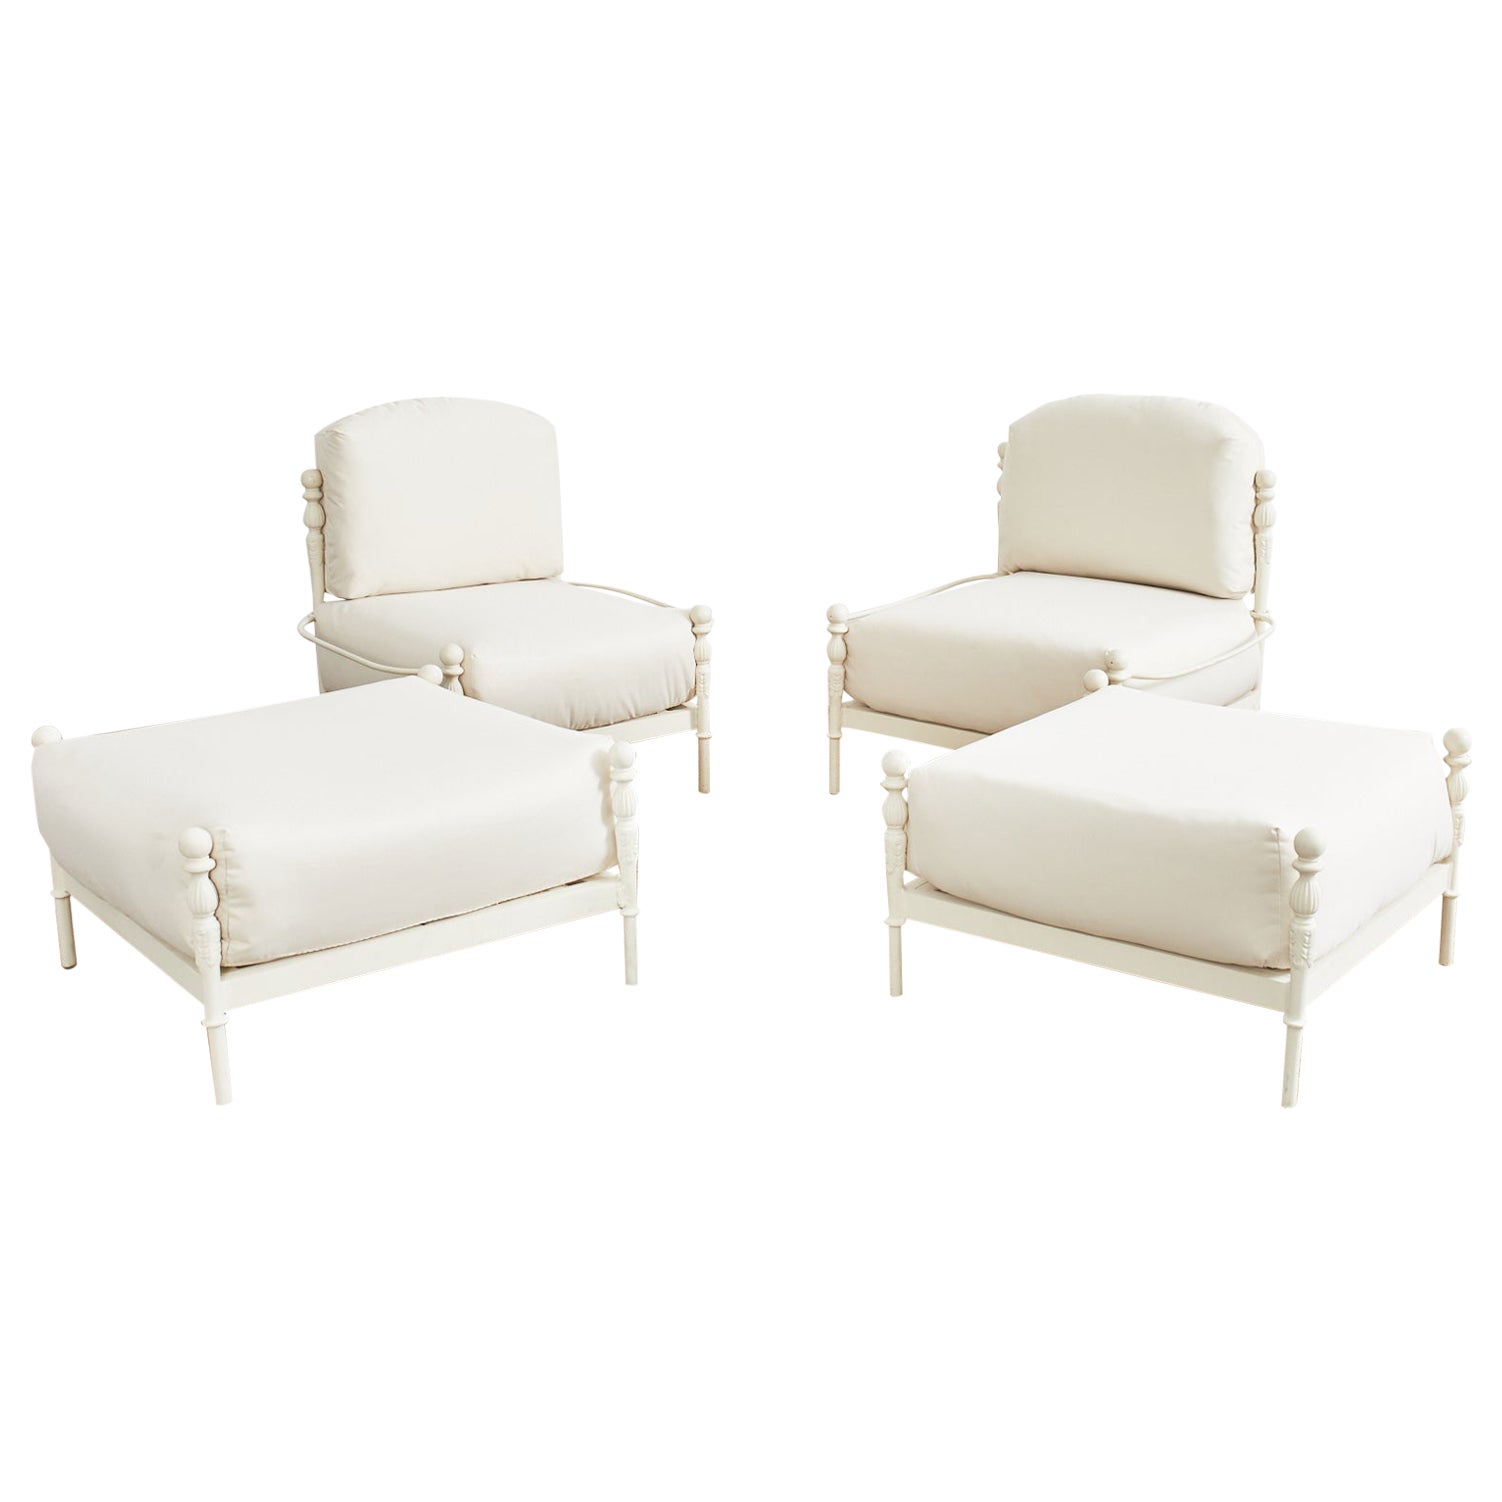 Pair of Michael Taylor Montecito Garden Chairs with Ottomans